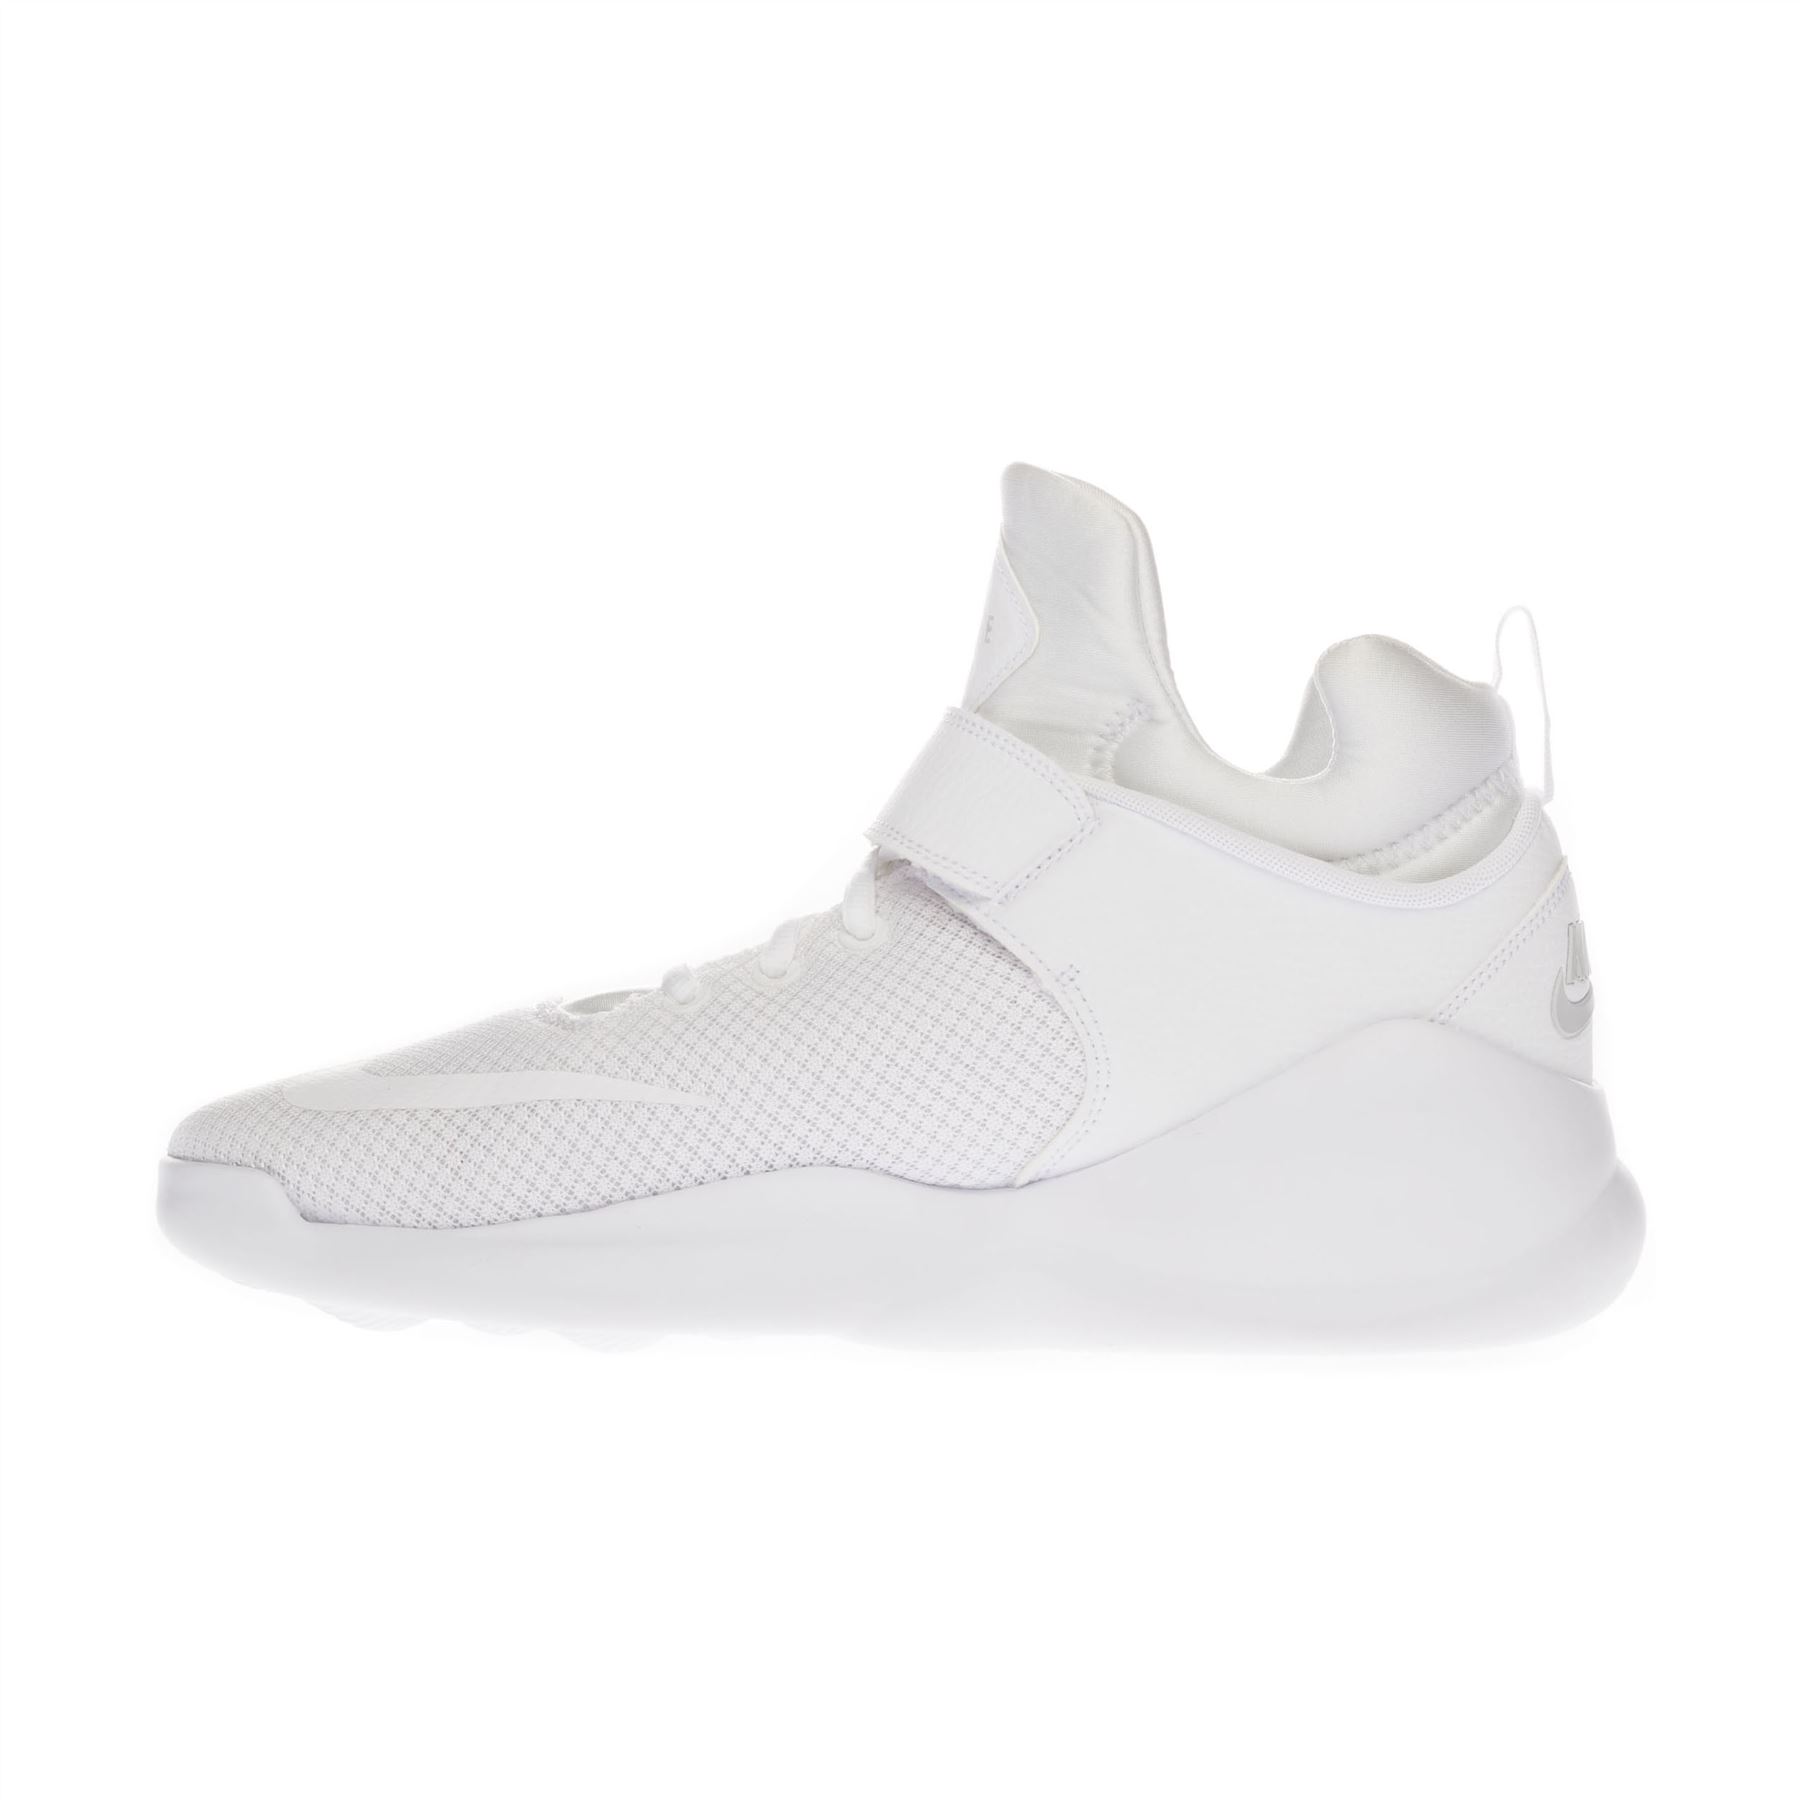 white nike shoes with velcro strap